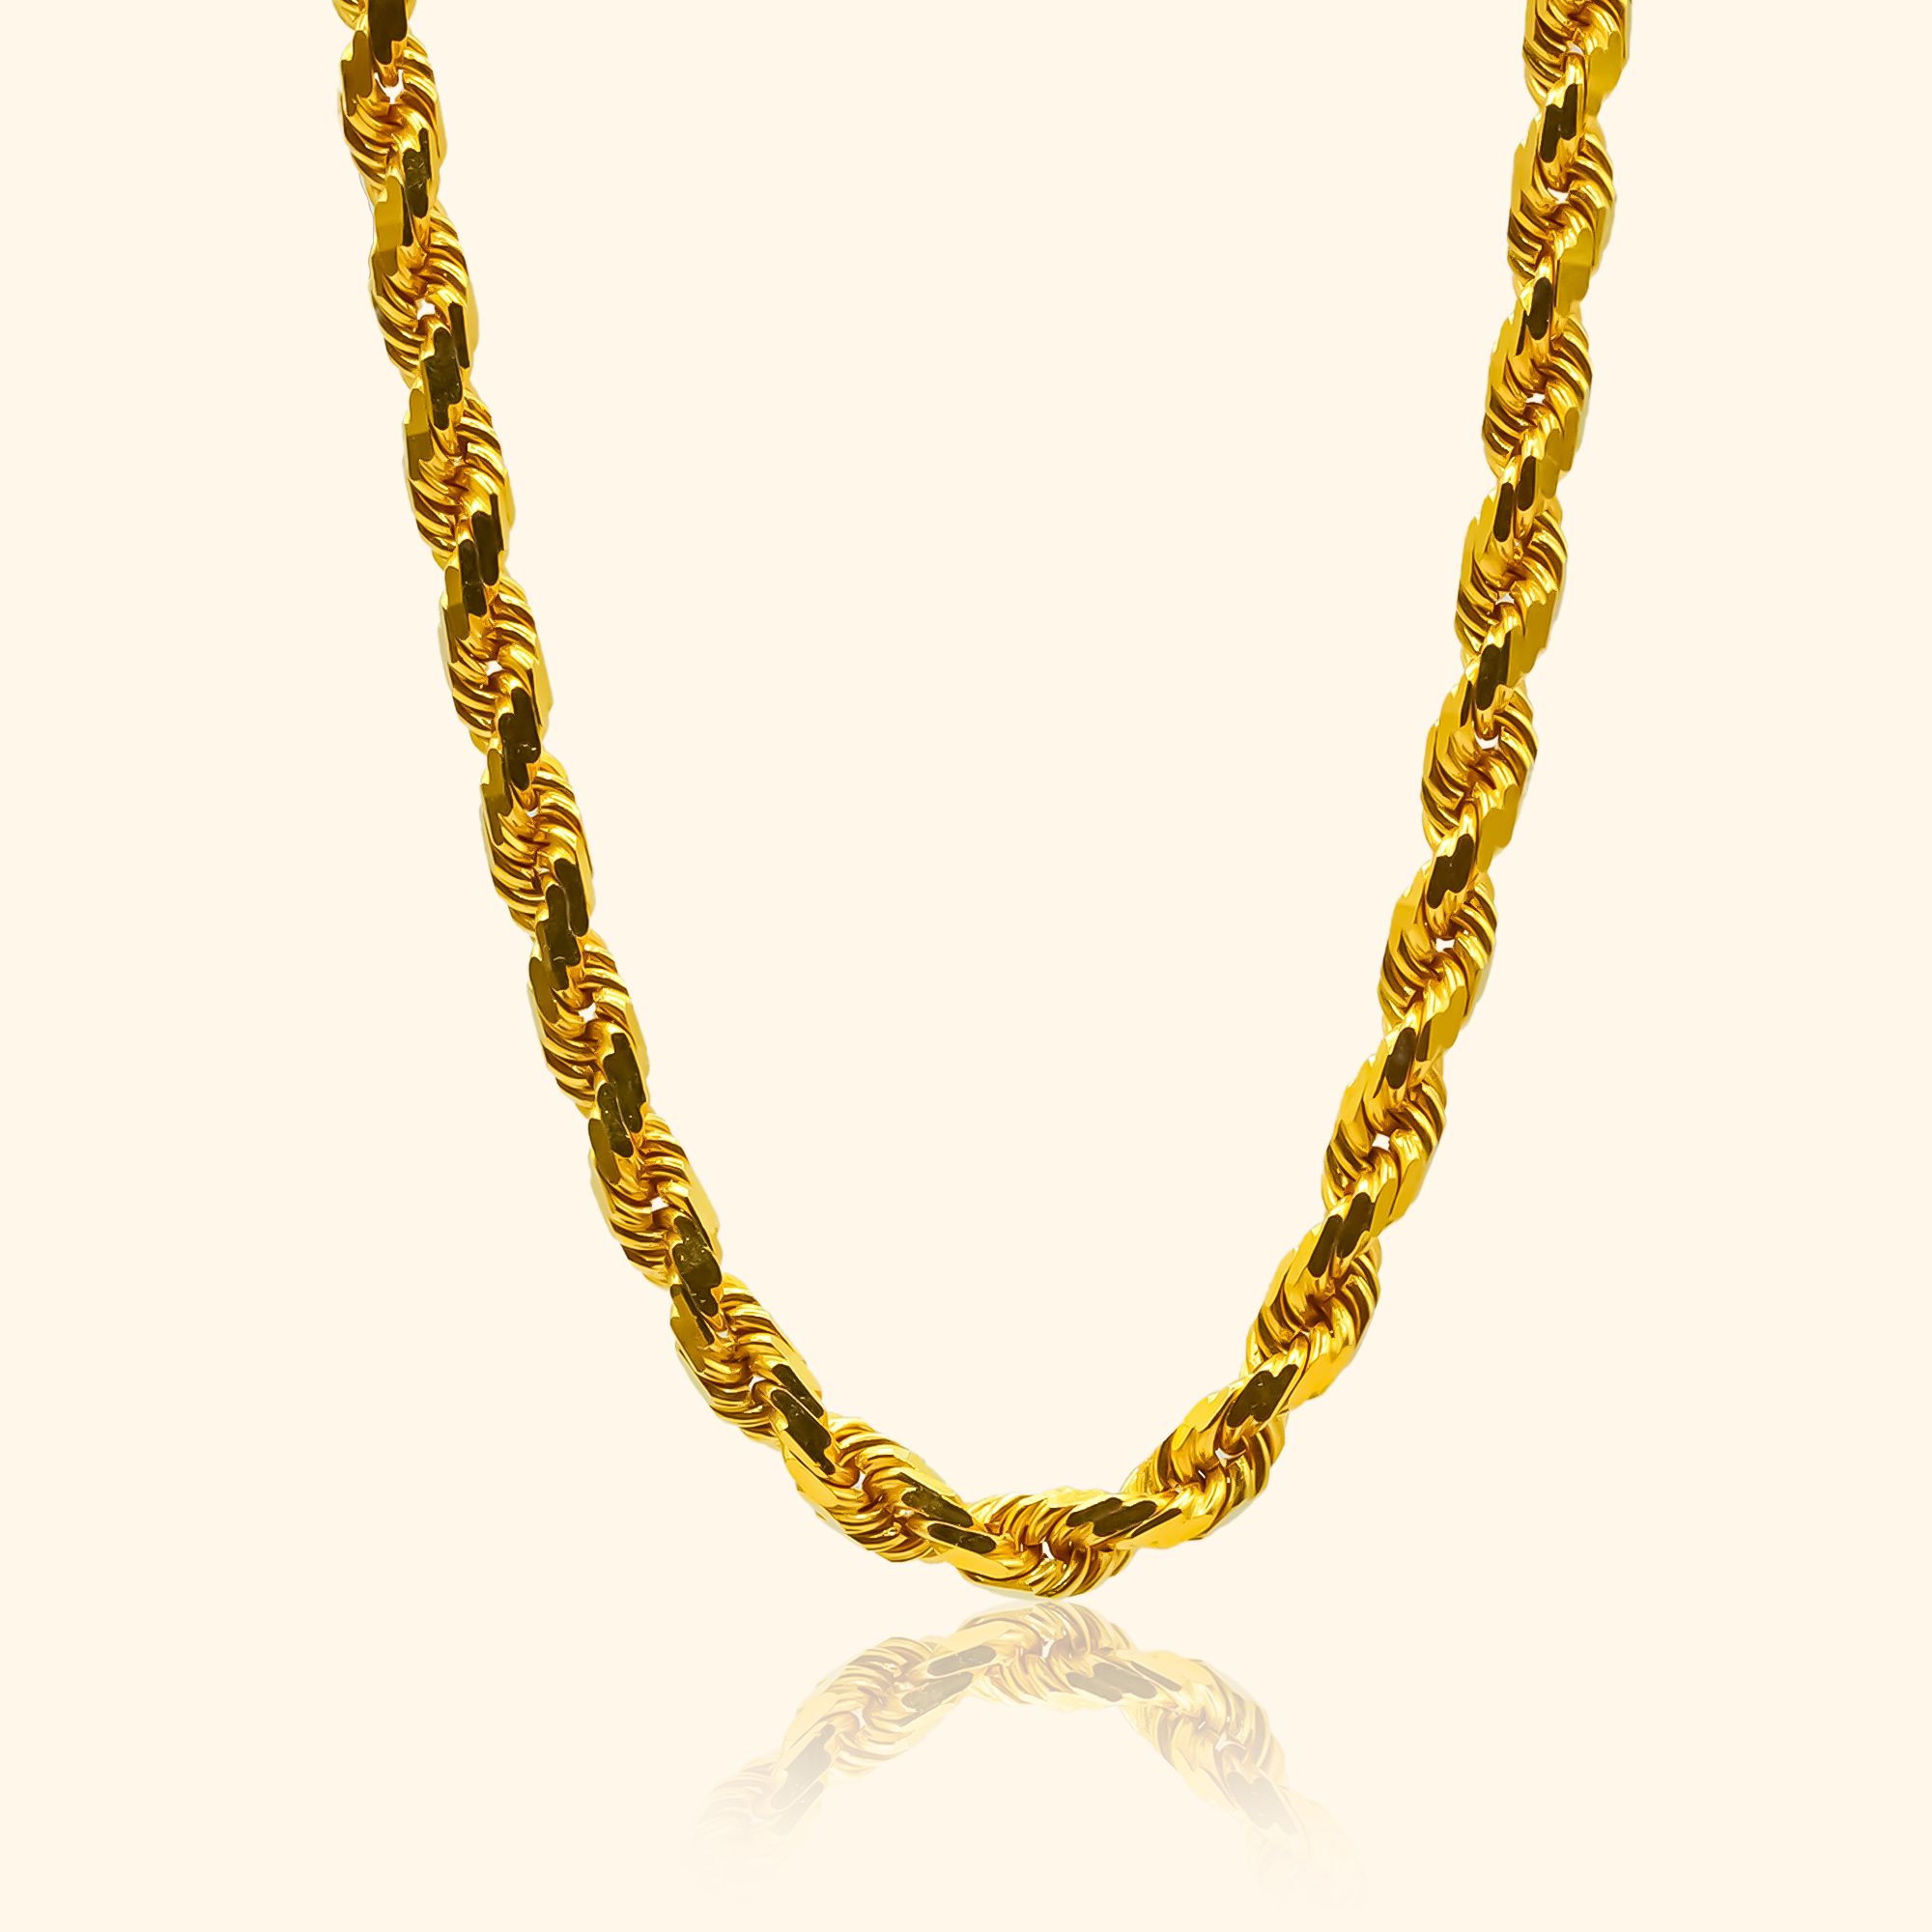 Gold jewelry in singapore, necklace 916 Gold Solid Rope Chain